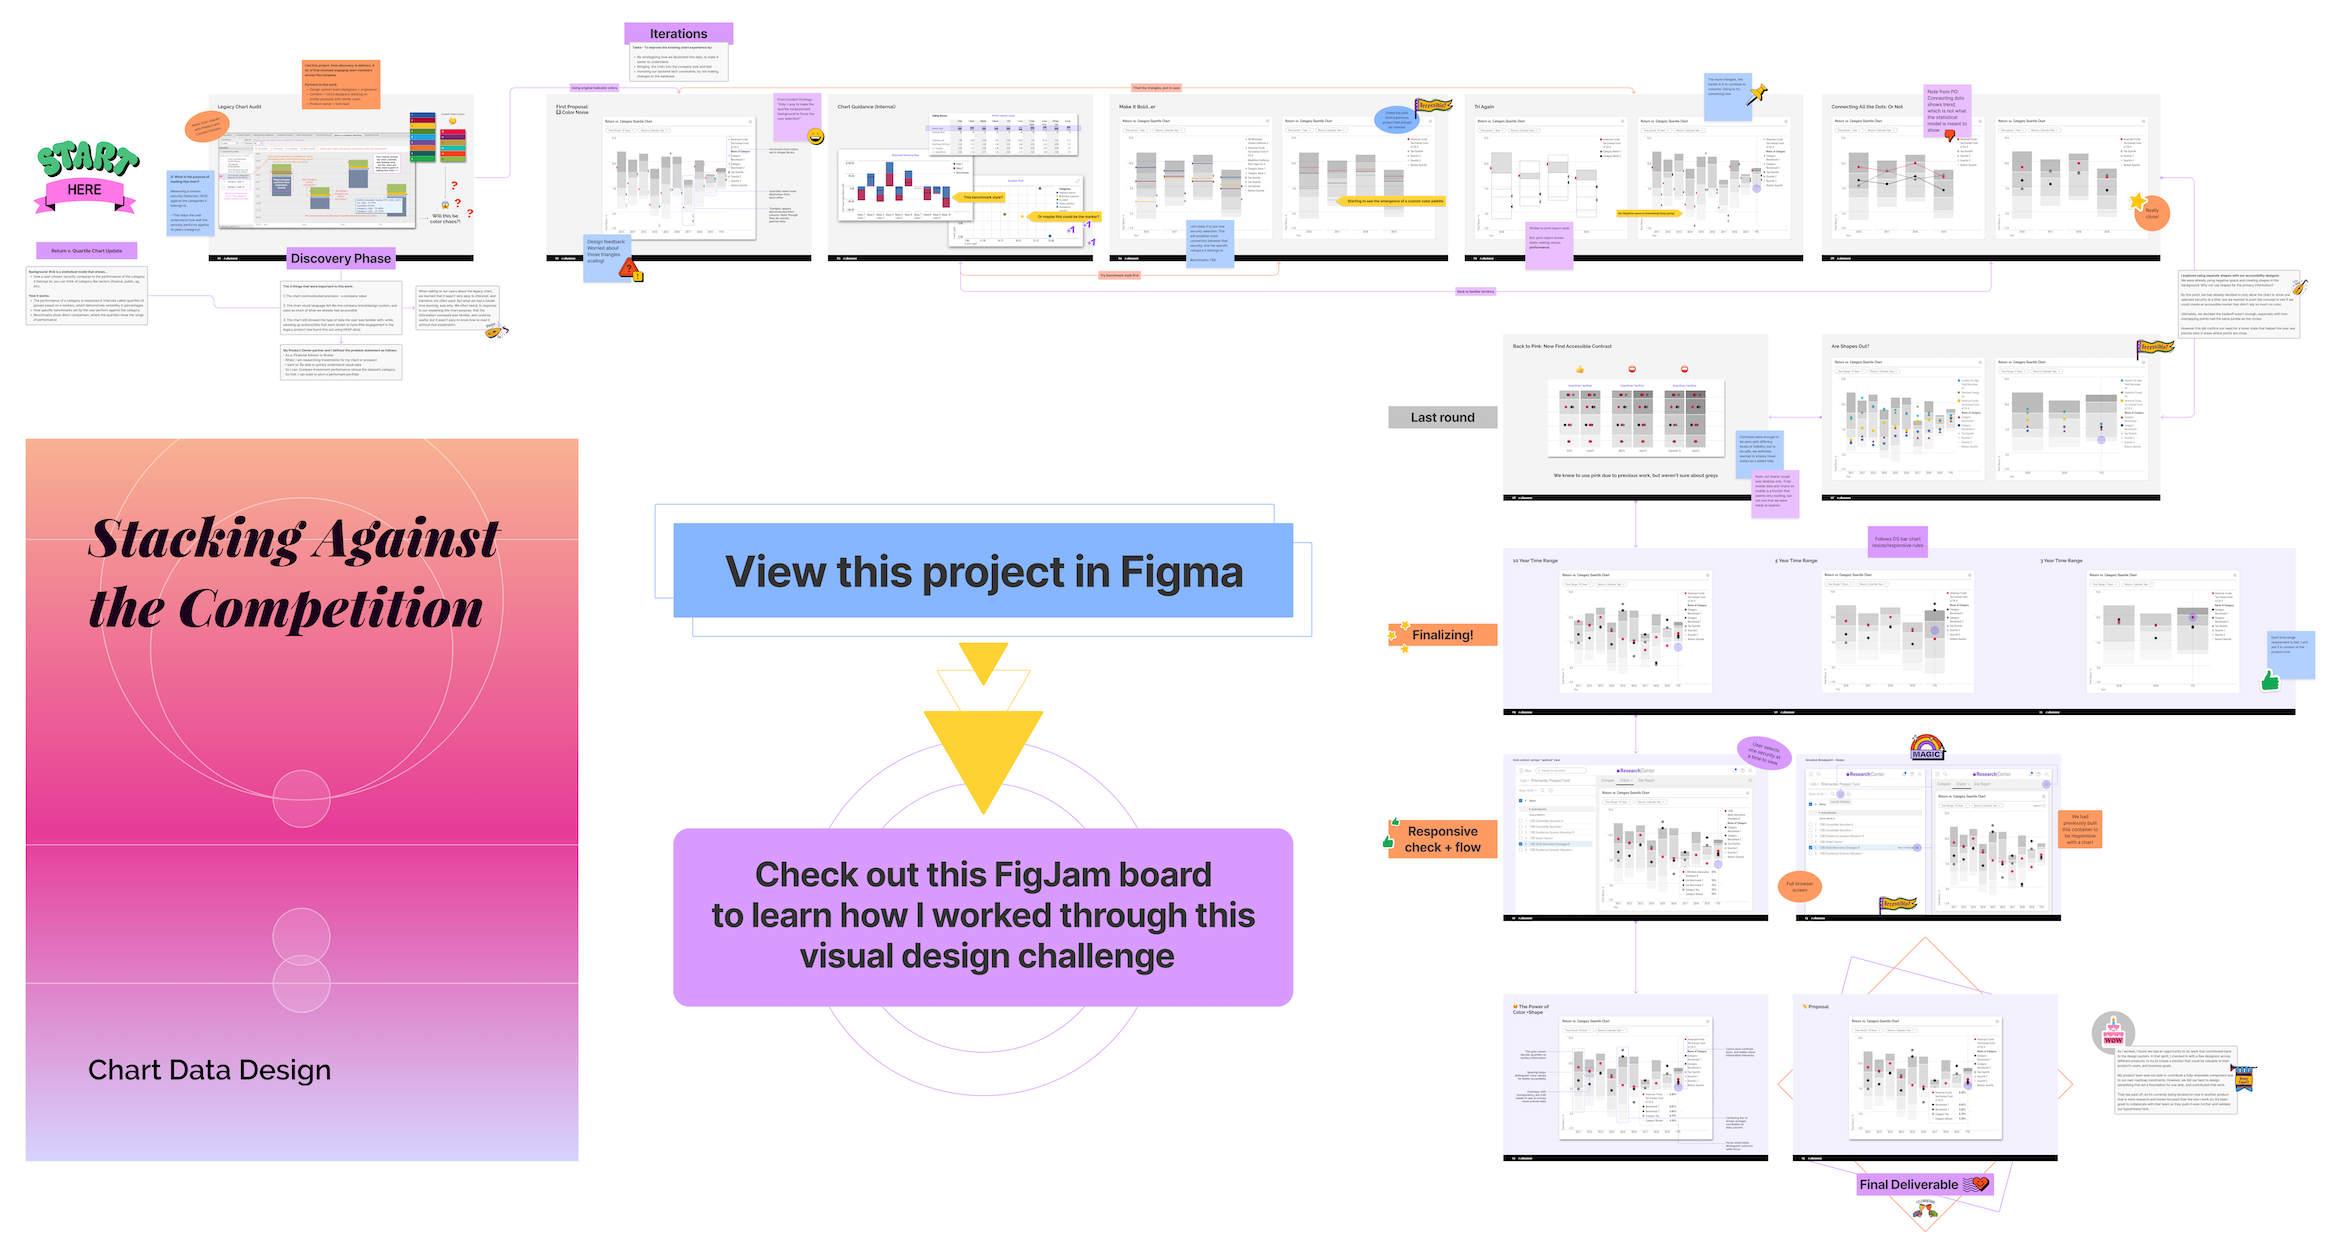 Preview of the whole chart data design walk through in FigJam